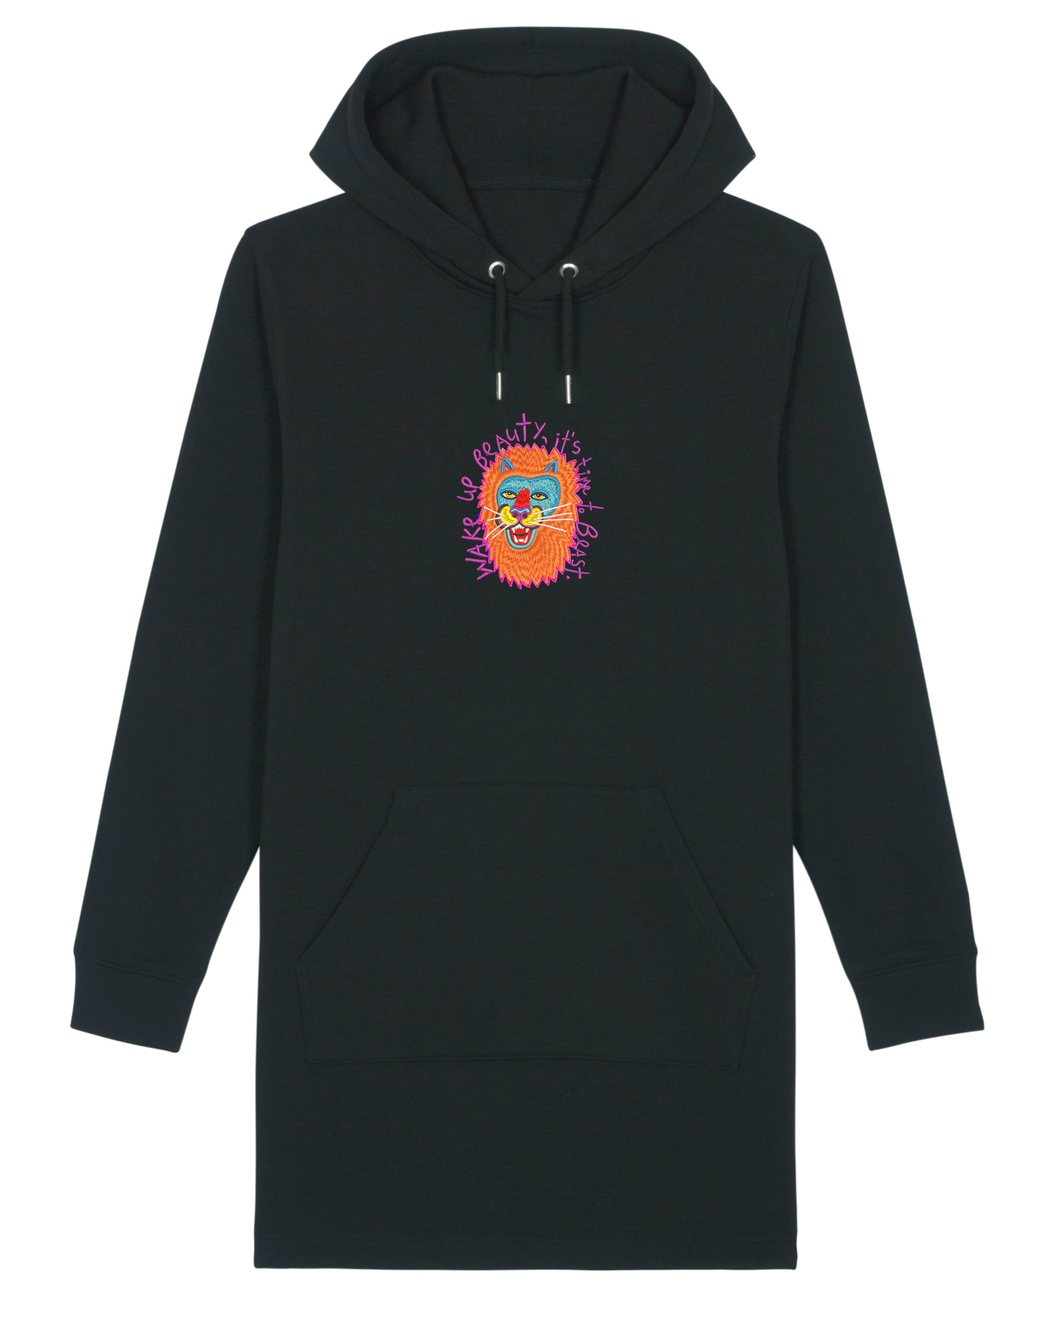 Lion - WAKE UP BEAUTY, IT'S TIME TO BEAST. - Embroidered WOMEN'S HOODIE DRESS